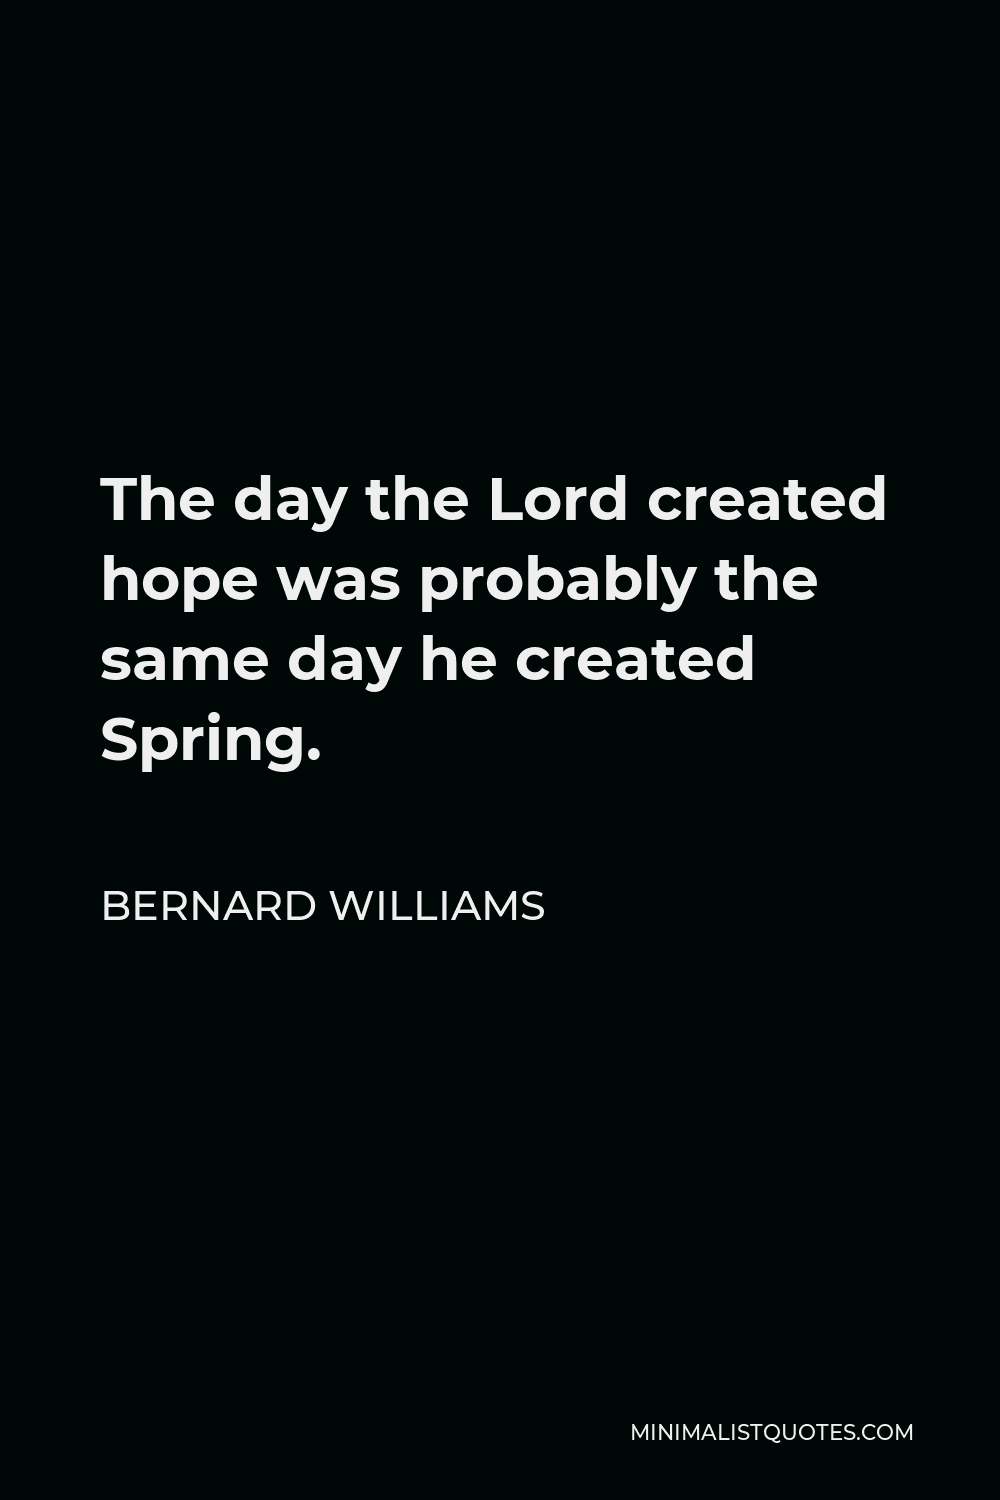 Bernard Williams Quote - The day the Lord created hope was probably the same day he created Spring.